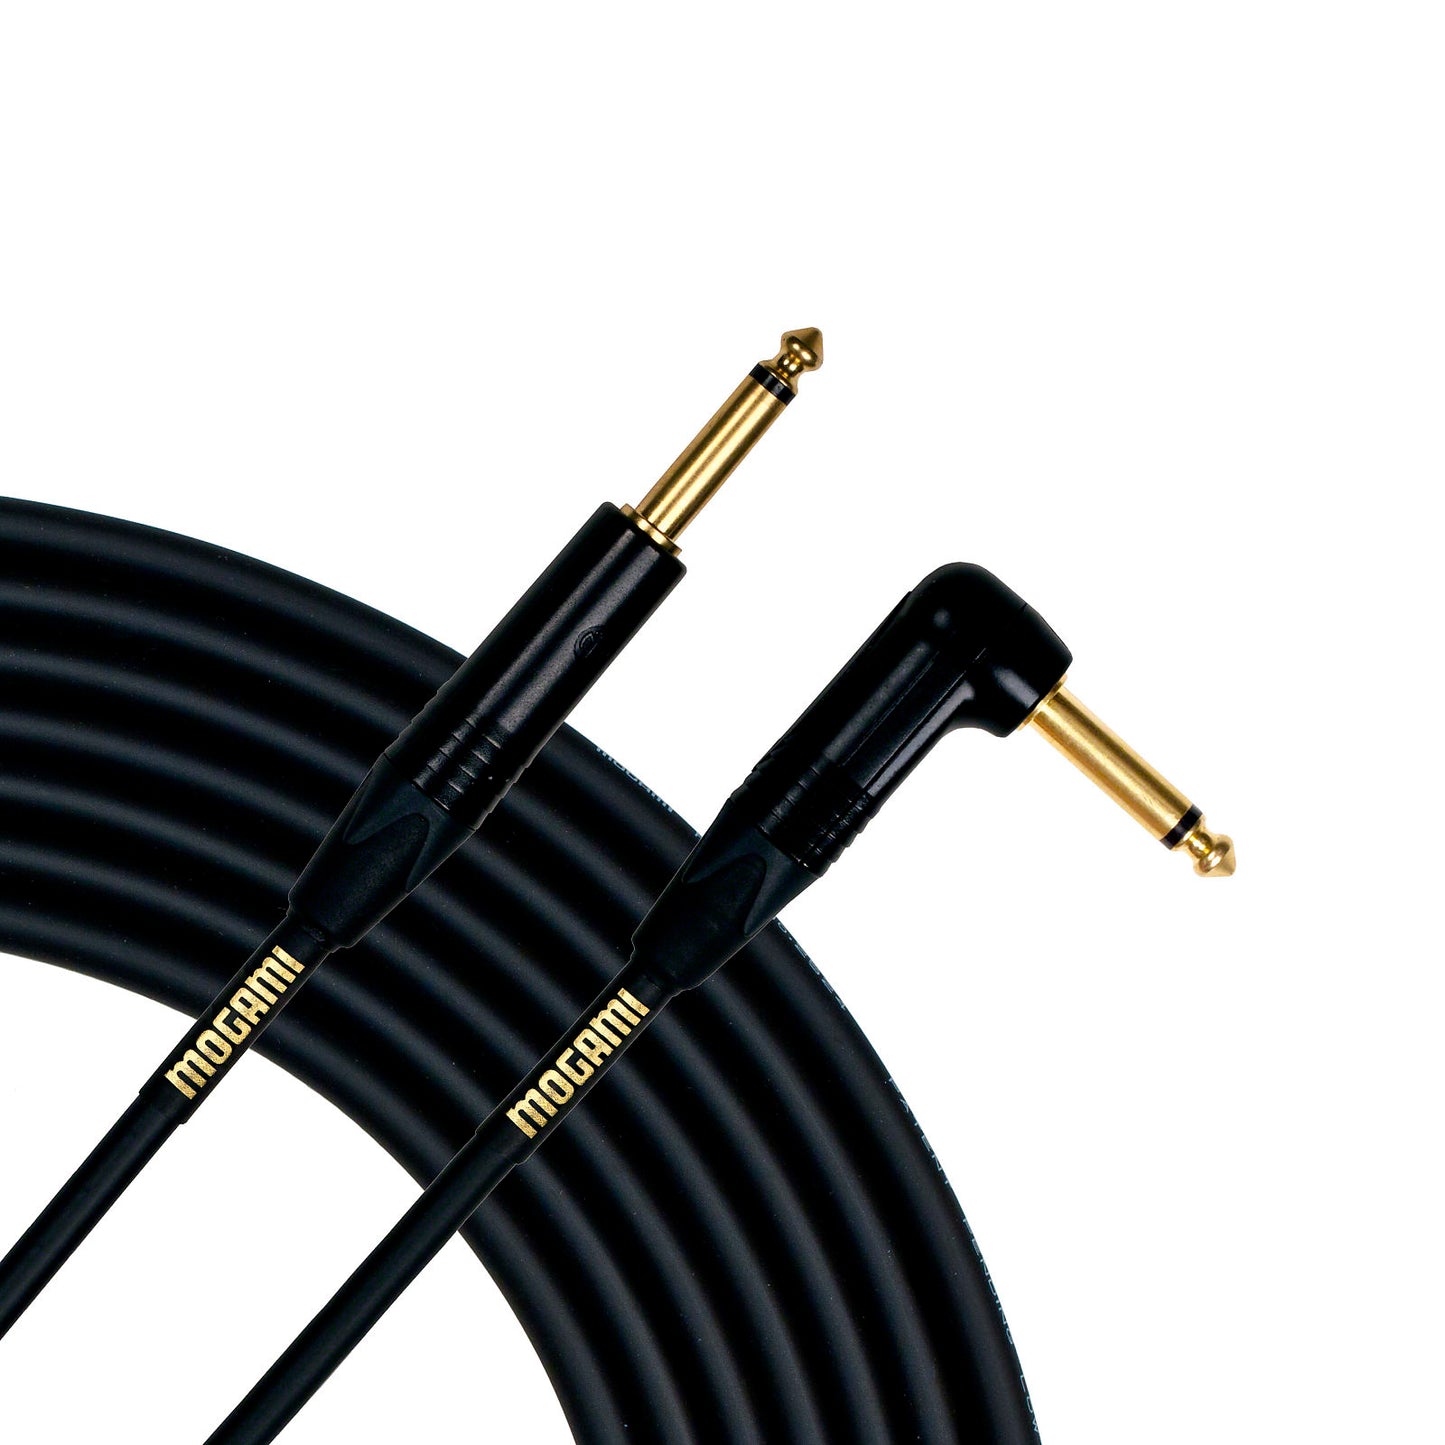 Mogami Gold Guitar/Instrument Cable (Straight to Right Angle End), 6 Foot